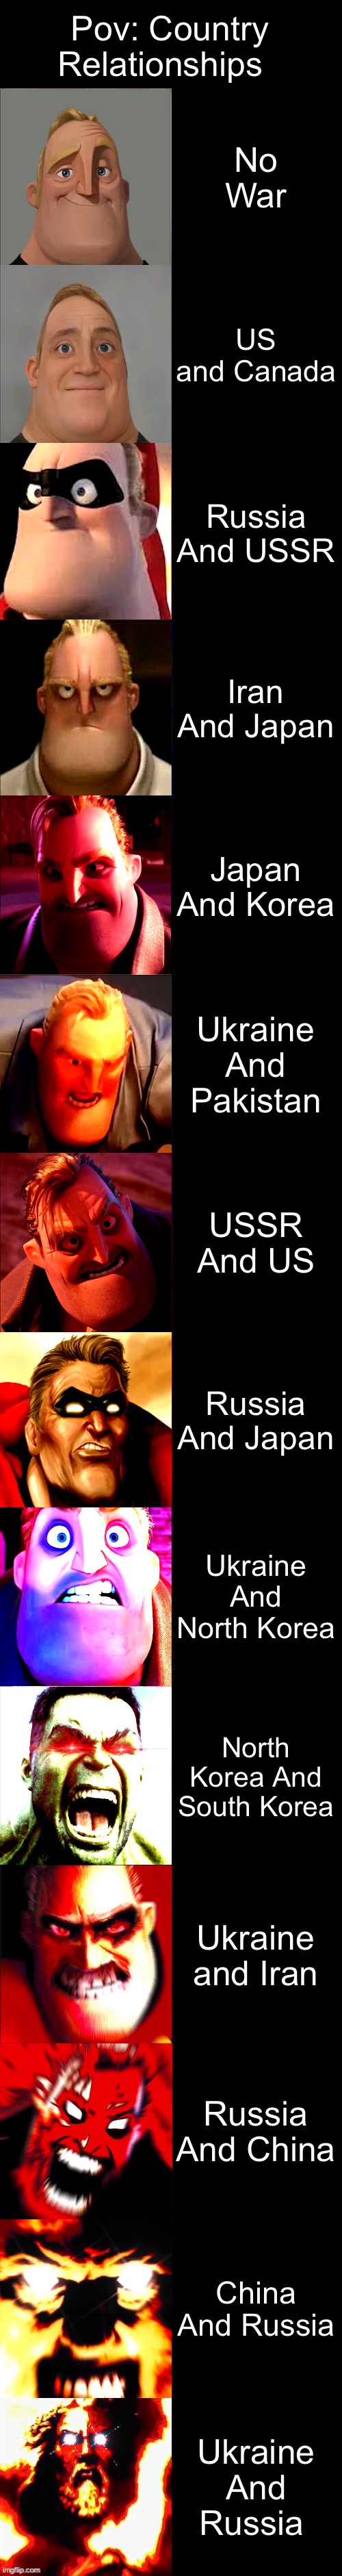 Mr Incredible Angry #1 | Pov: Country Relationships; No War; US and Canada; Russia And USSR; Iran And Japan; Japan And Korea; Ukraine And Pakistan; USSR And US; Russia And Japan; Ukraine And North Korea; North Korea And South Korea; Ukraine and Iran; Russia And China; China And Russia; Ukraine And Russia | image tagged in mr incredible becoming angry extended | made w/ Imgflip meme maker